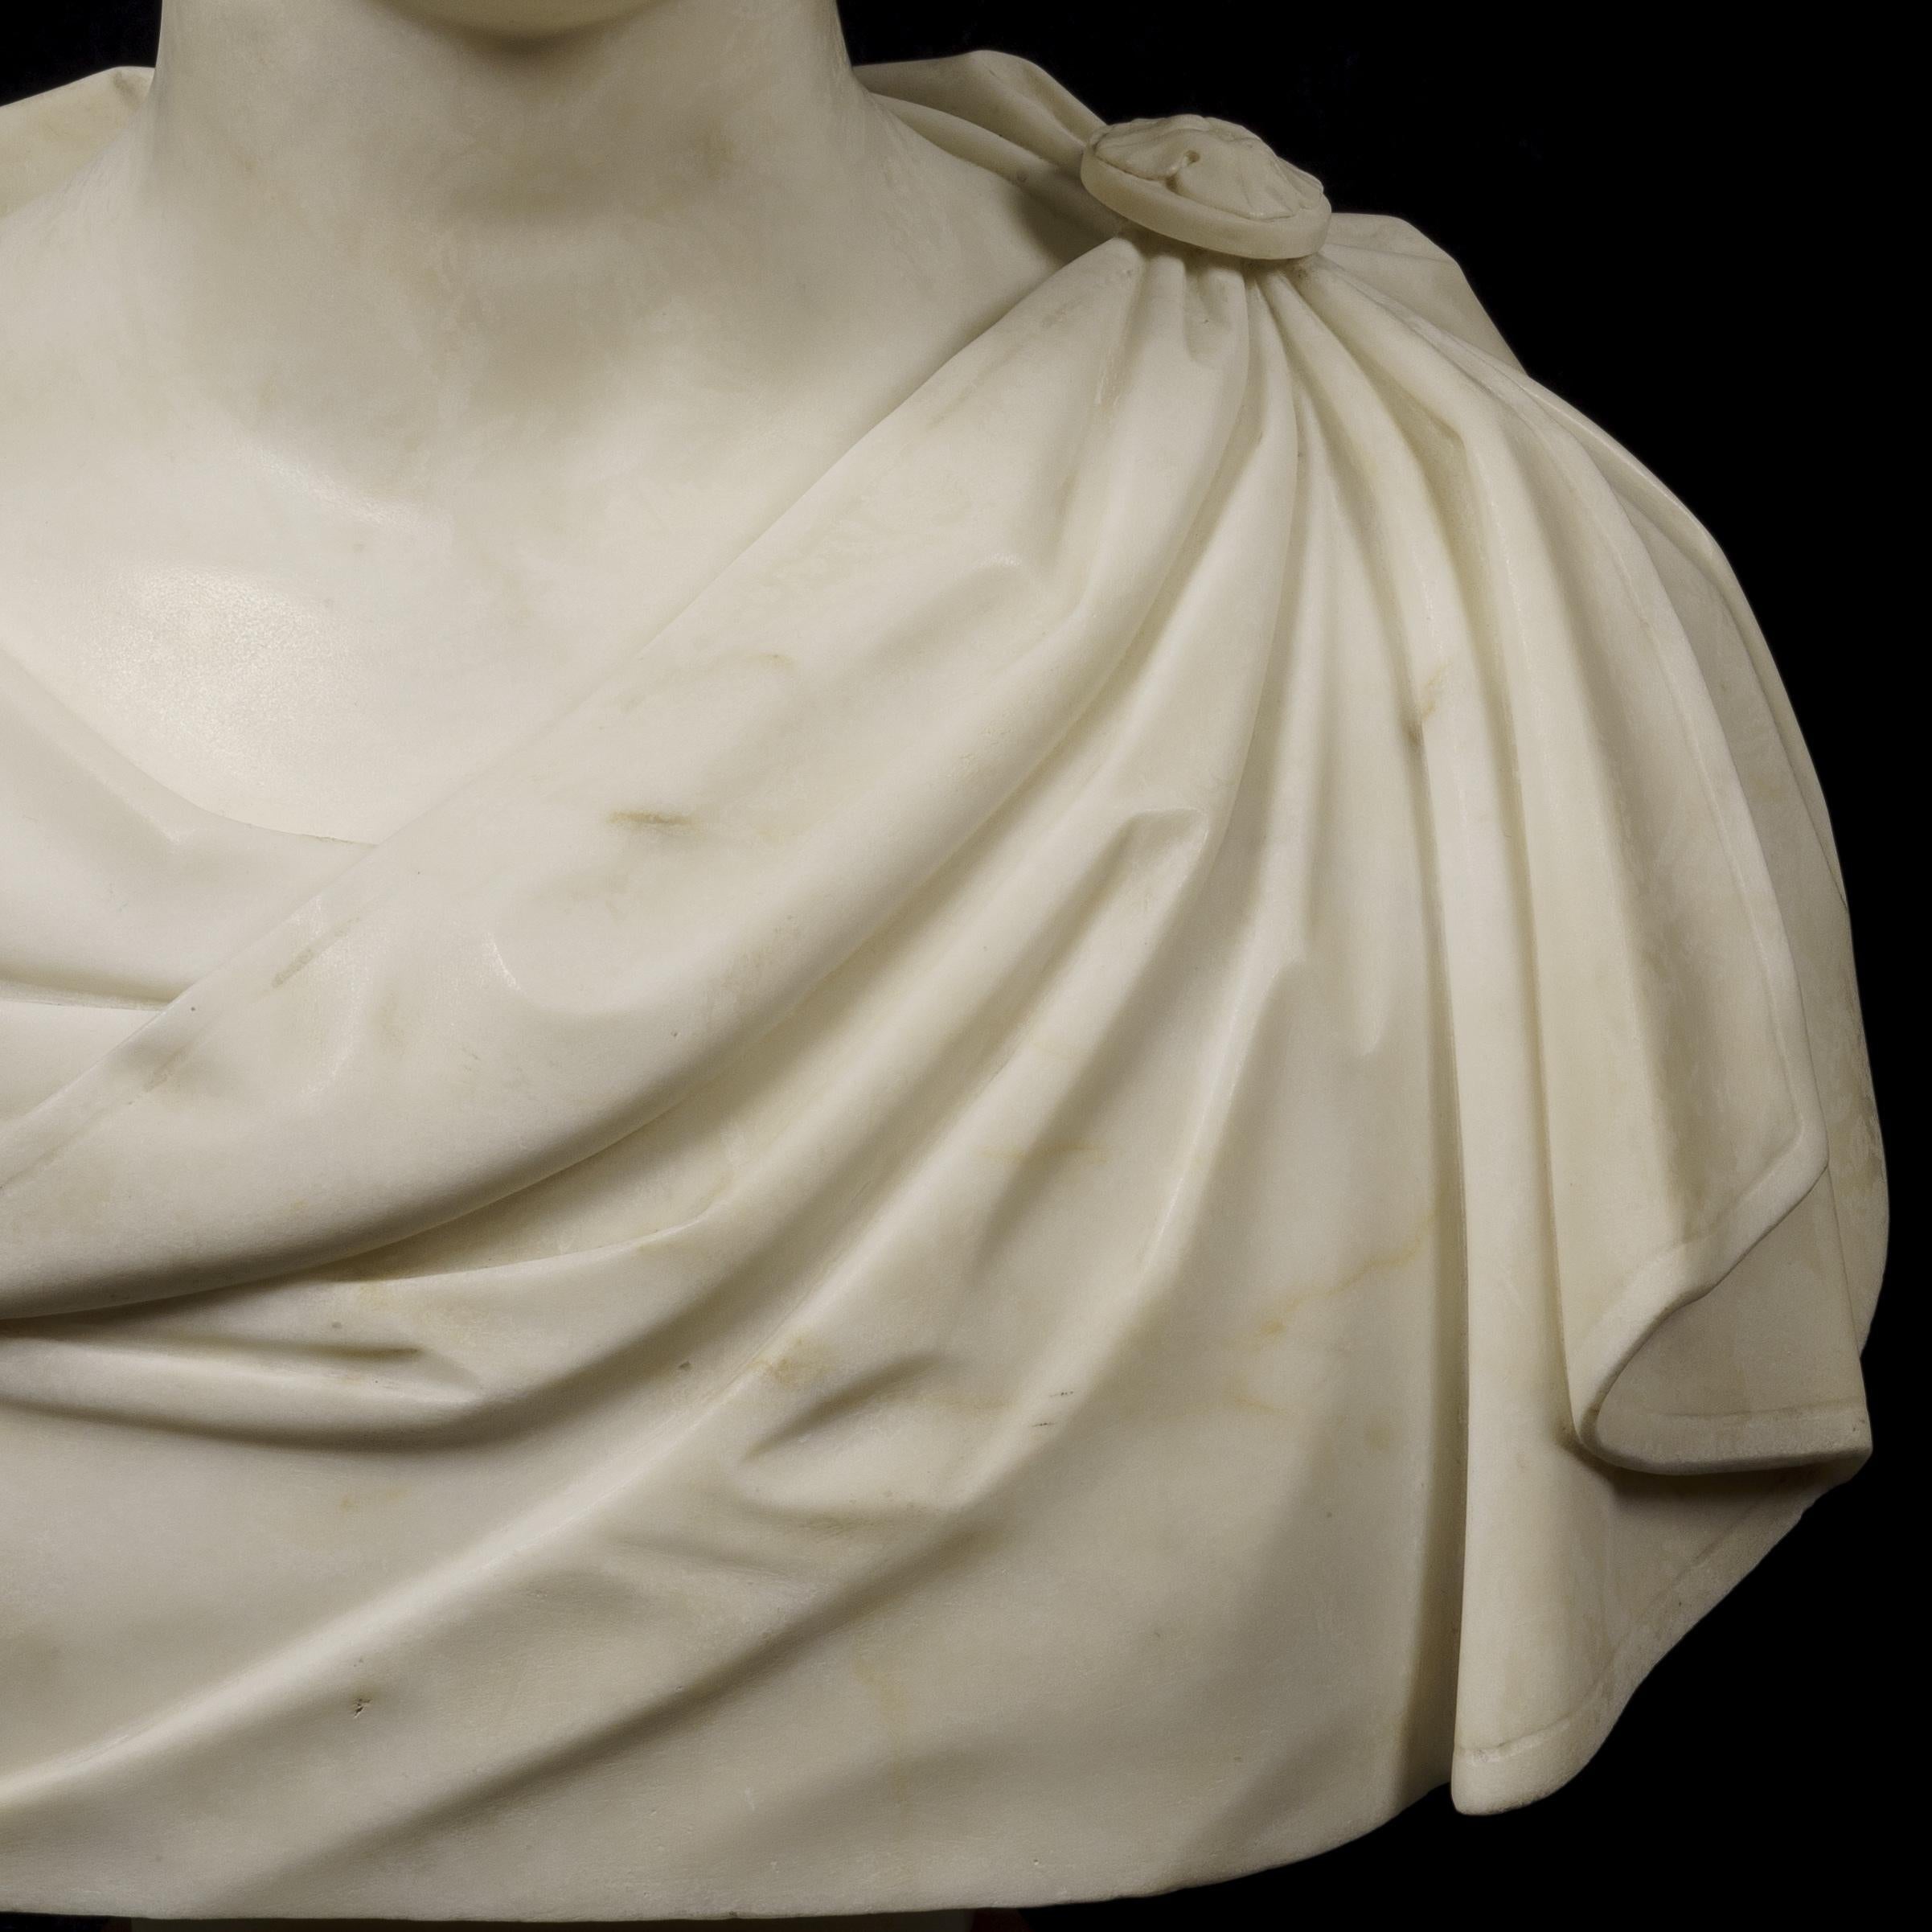 A male portrait bust in the Roman manner by Lawrence MacDonald (1799-1878) Carved in Carrara marble, rising from a round socle supporting a waisted column, the bust having resemblances to Arthur Wellesley, the Duke of Wellington as a young man.